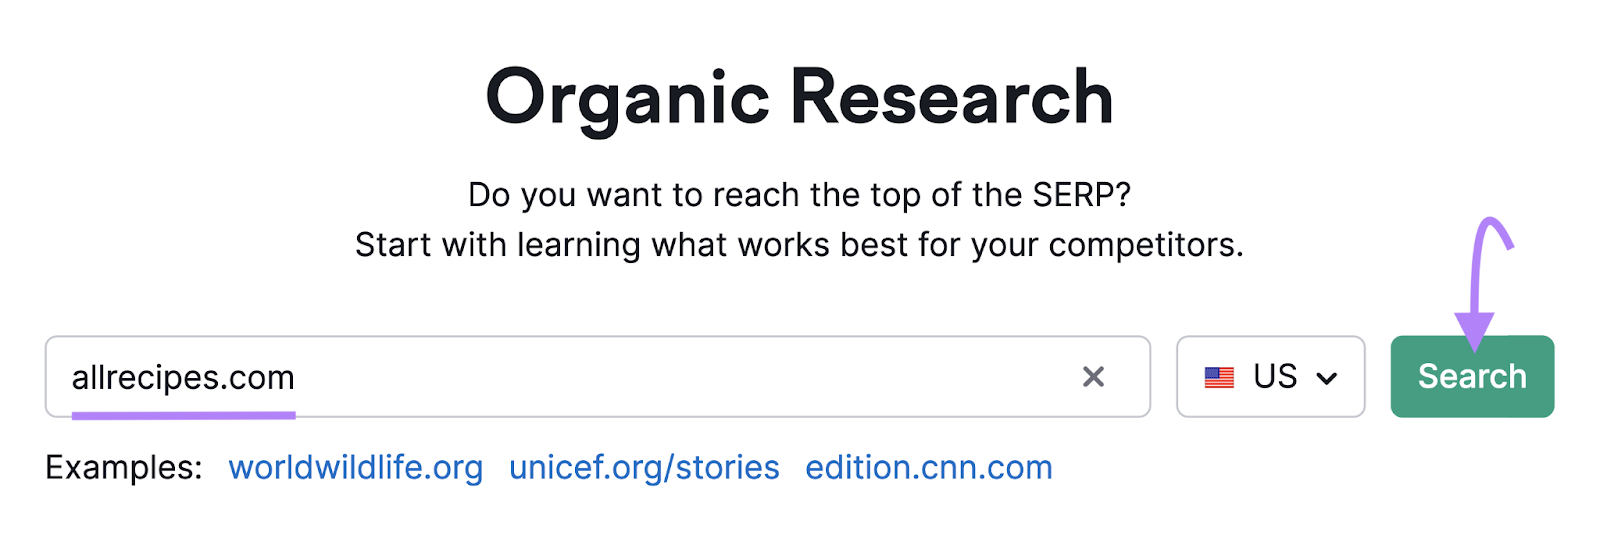 "allrecipes.com" entered into the Organic Research search bar